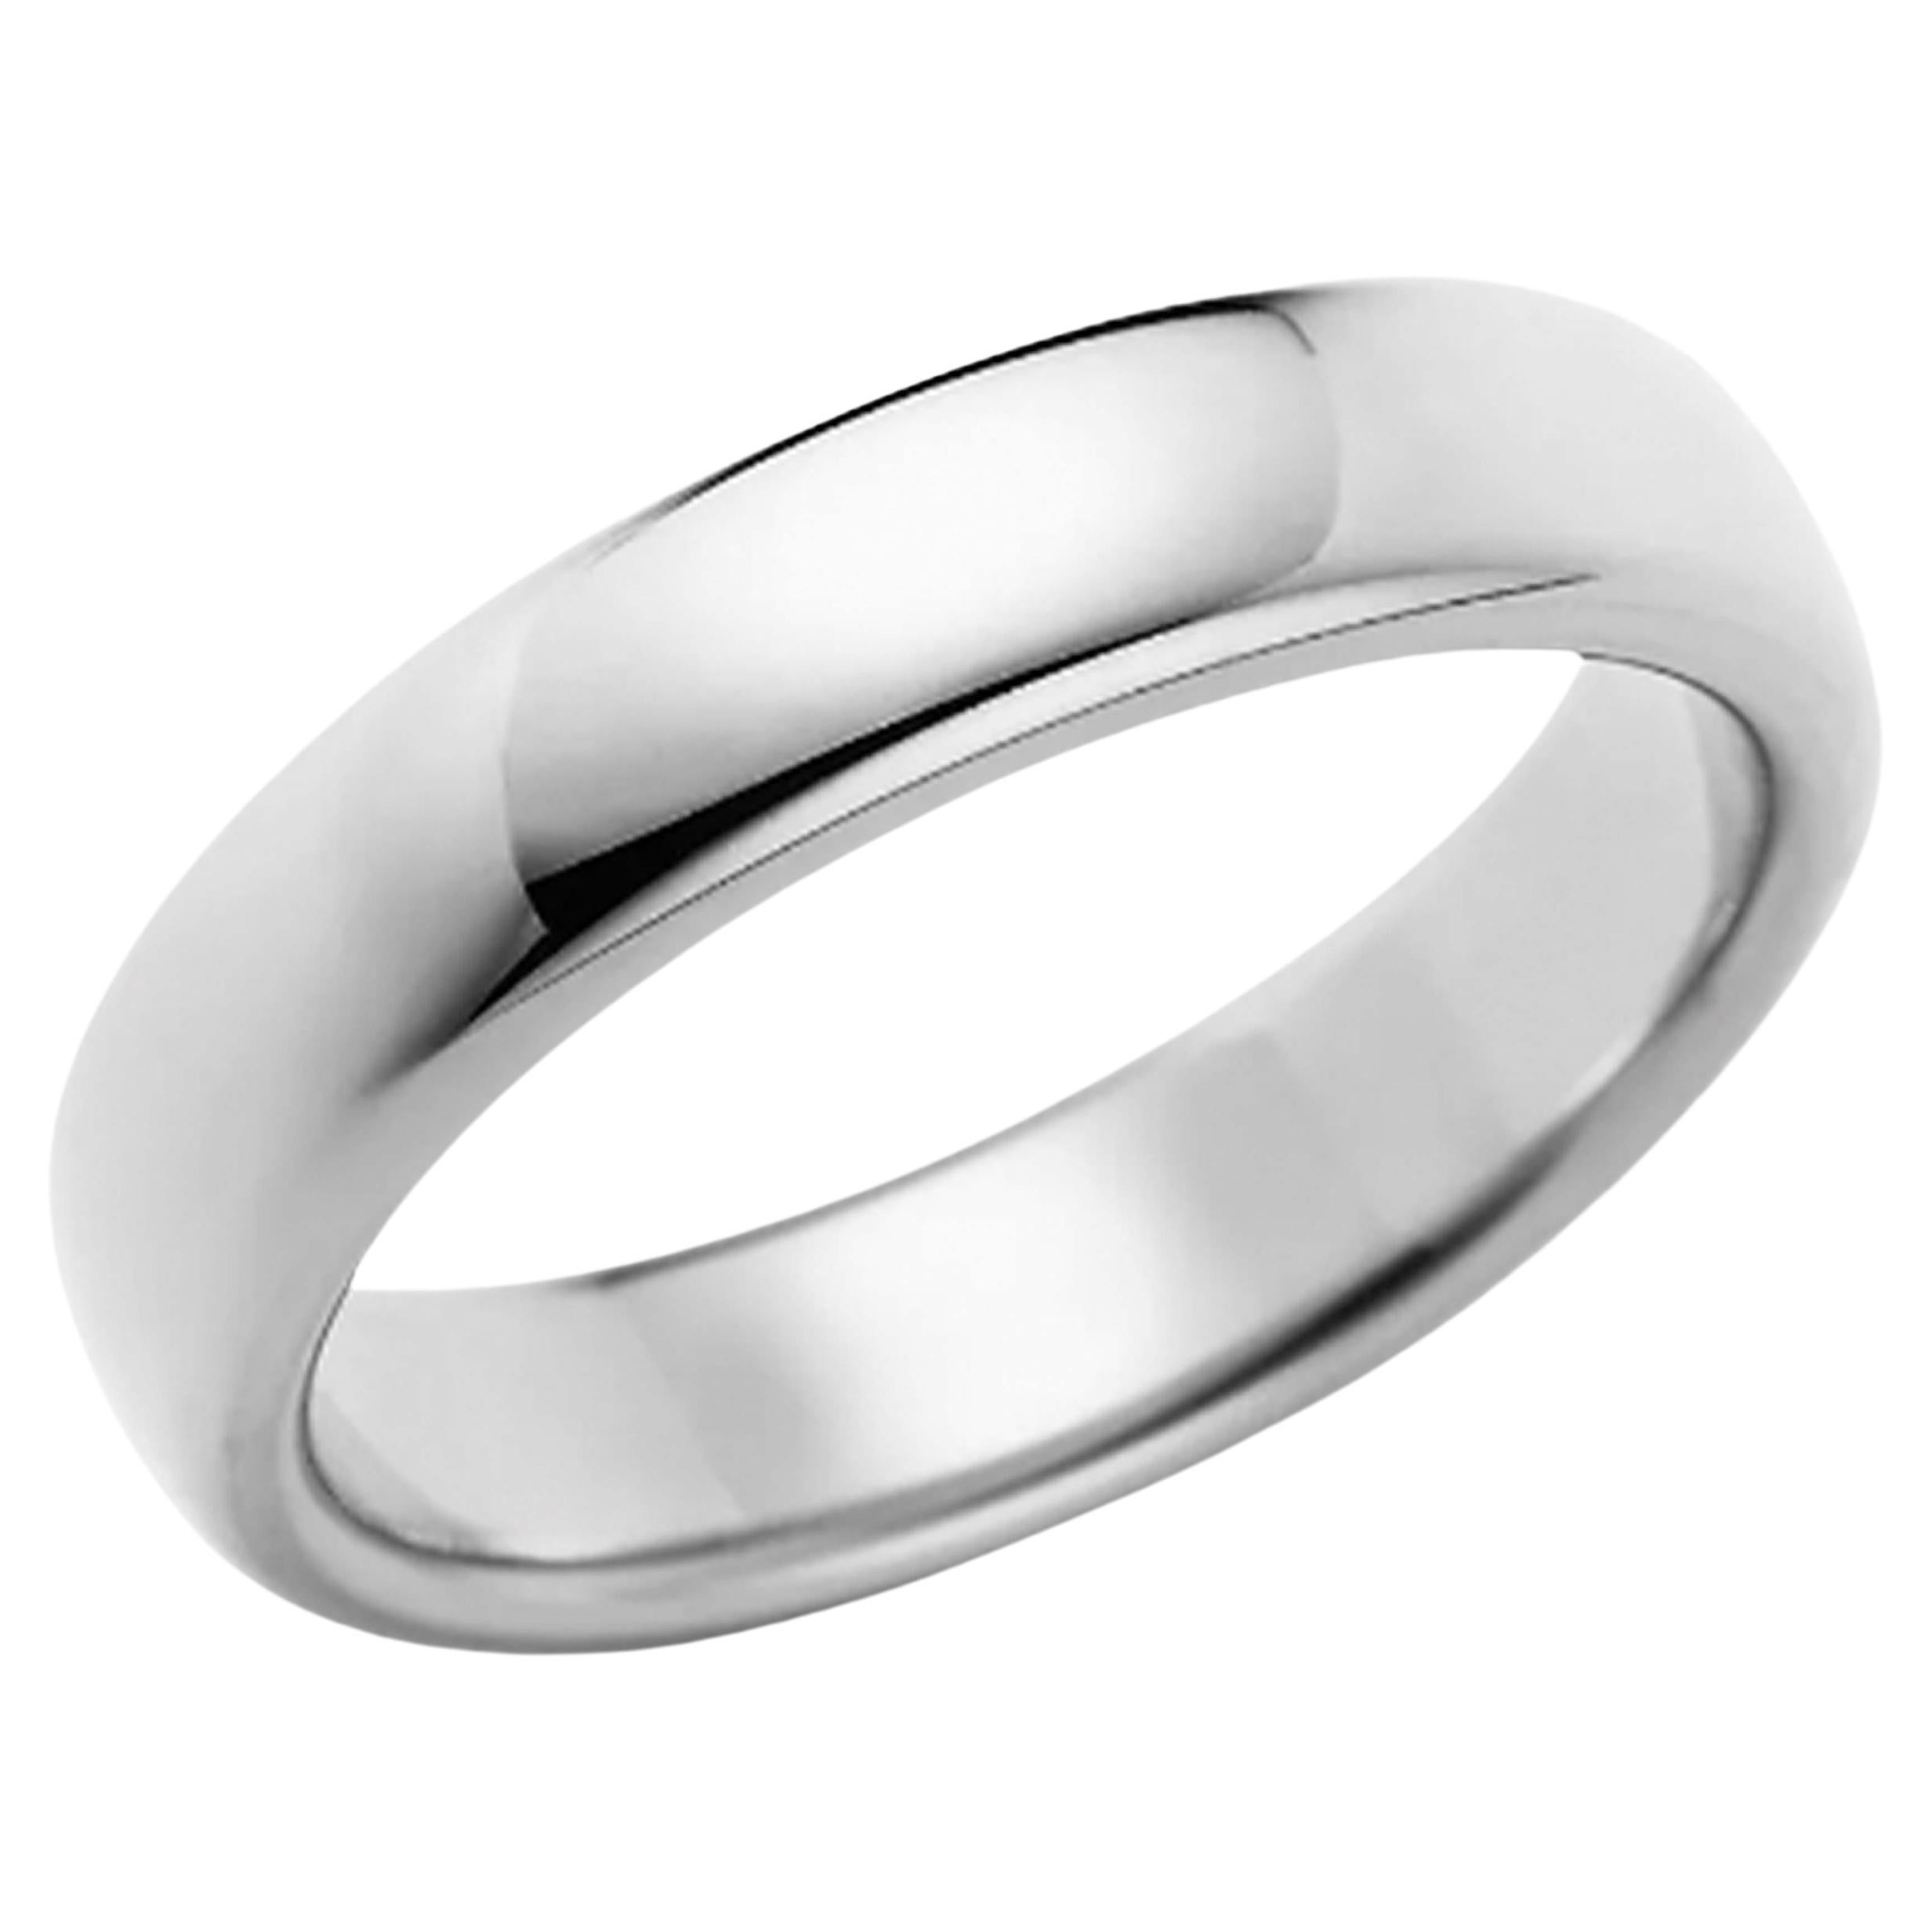 1999 Tiffany & Co. Forever Wedding Band Ring Platinum 4.5 mm Wide For Sale